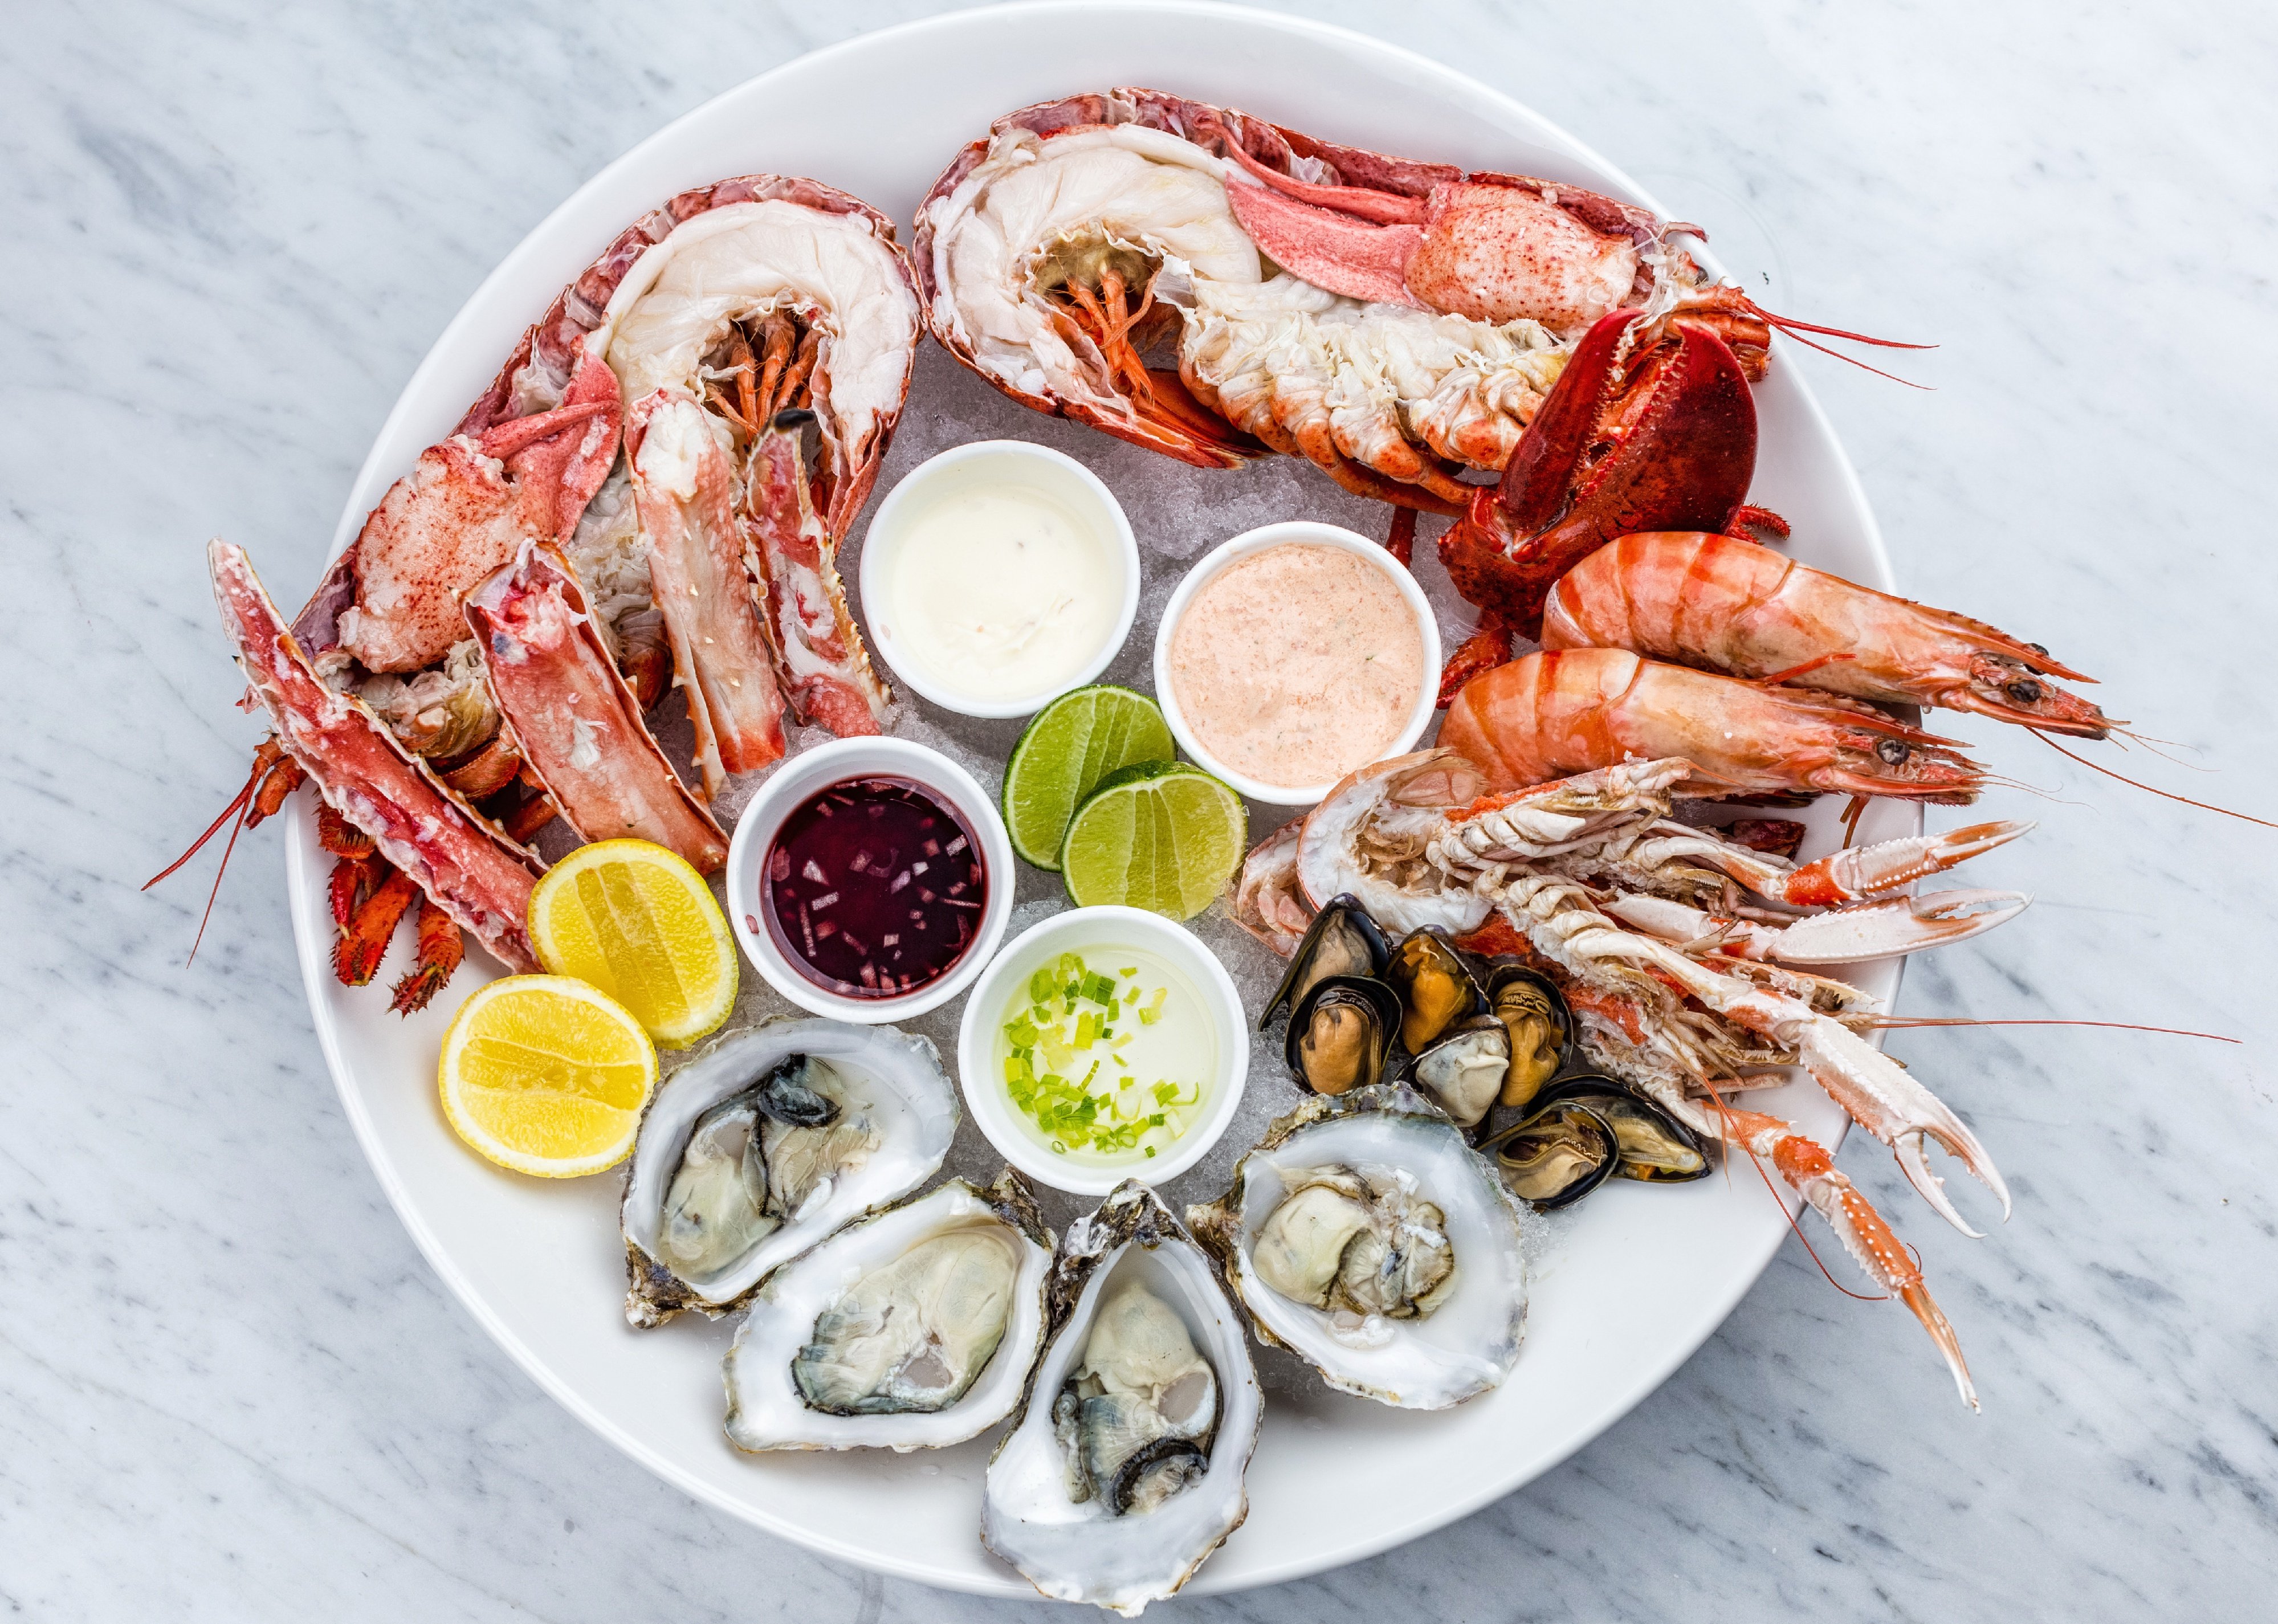 Highest-rated seafood restaurants in Dallas, according to Tripadvisor